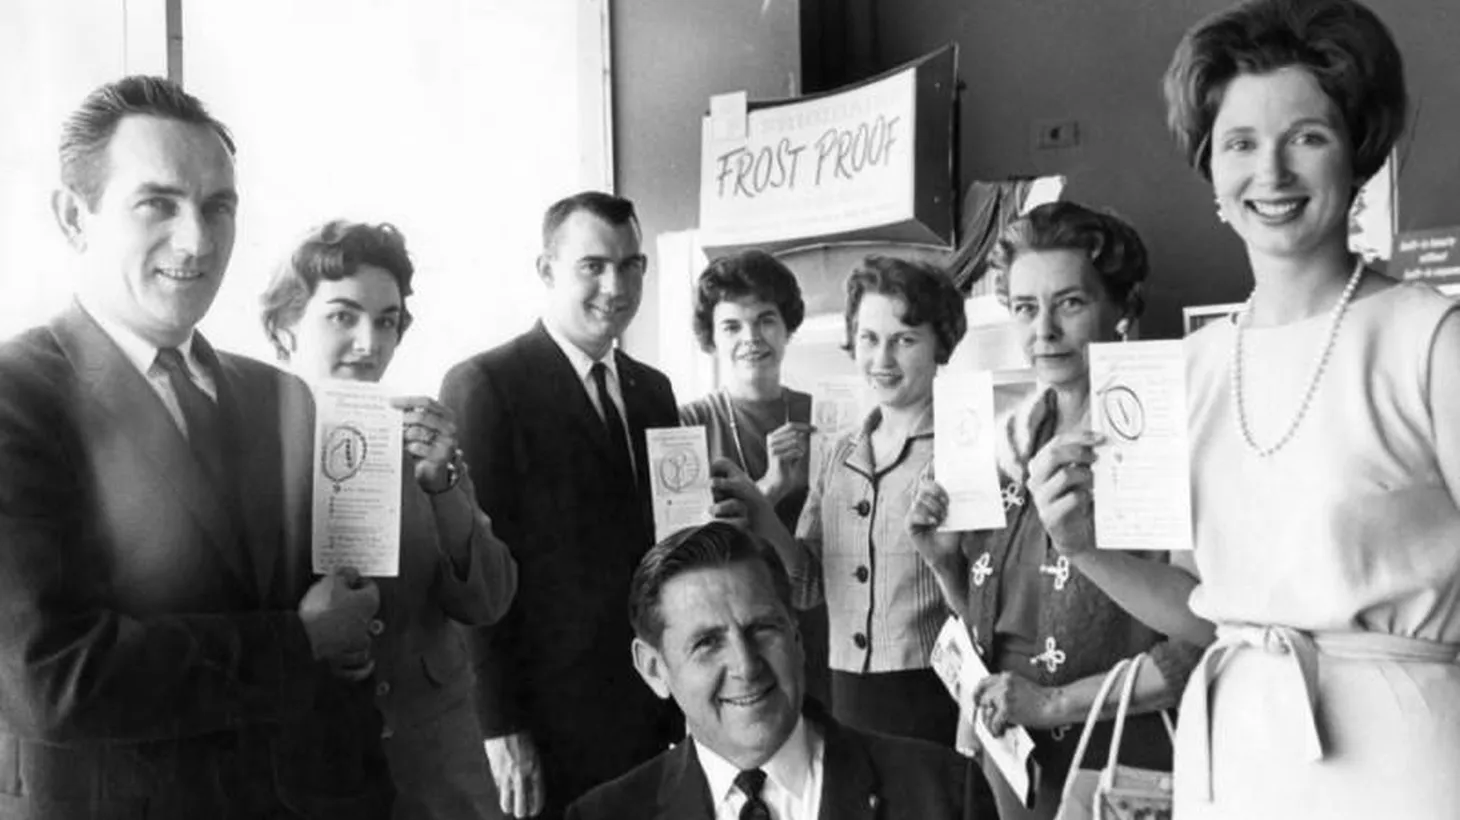 Roy Rick, owner of Rick's Appliances in Burbank (center), smiles alongside other winners of a Frigidaire campaign, c. 1963.